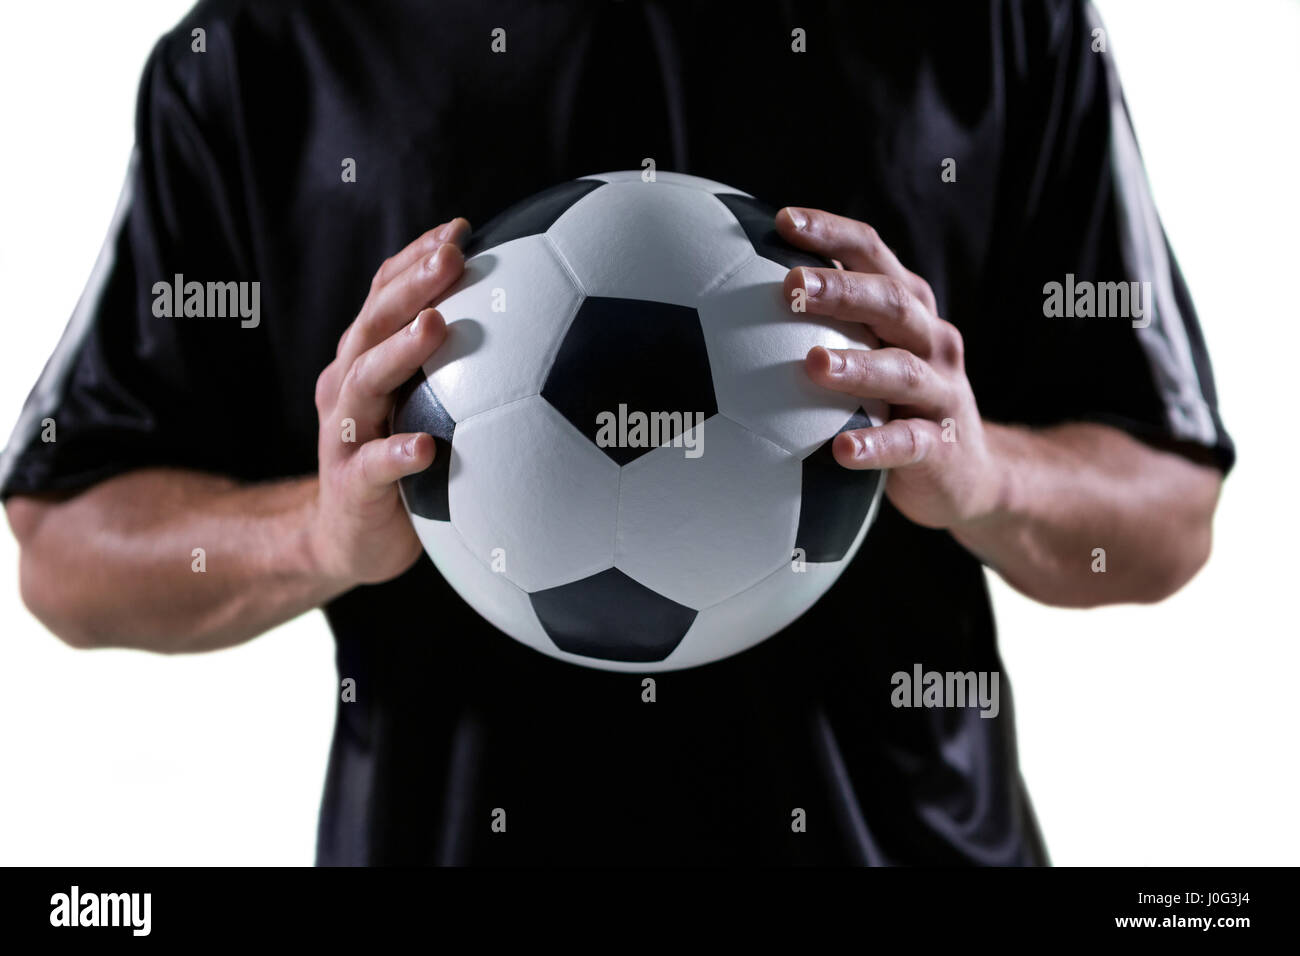 Football Player Holding Football With Both Hands Stock Photo